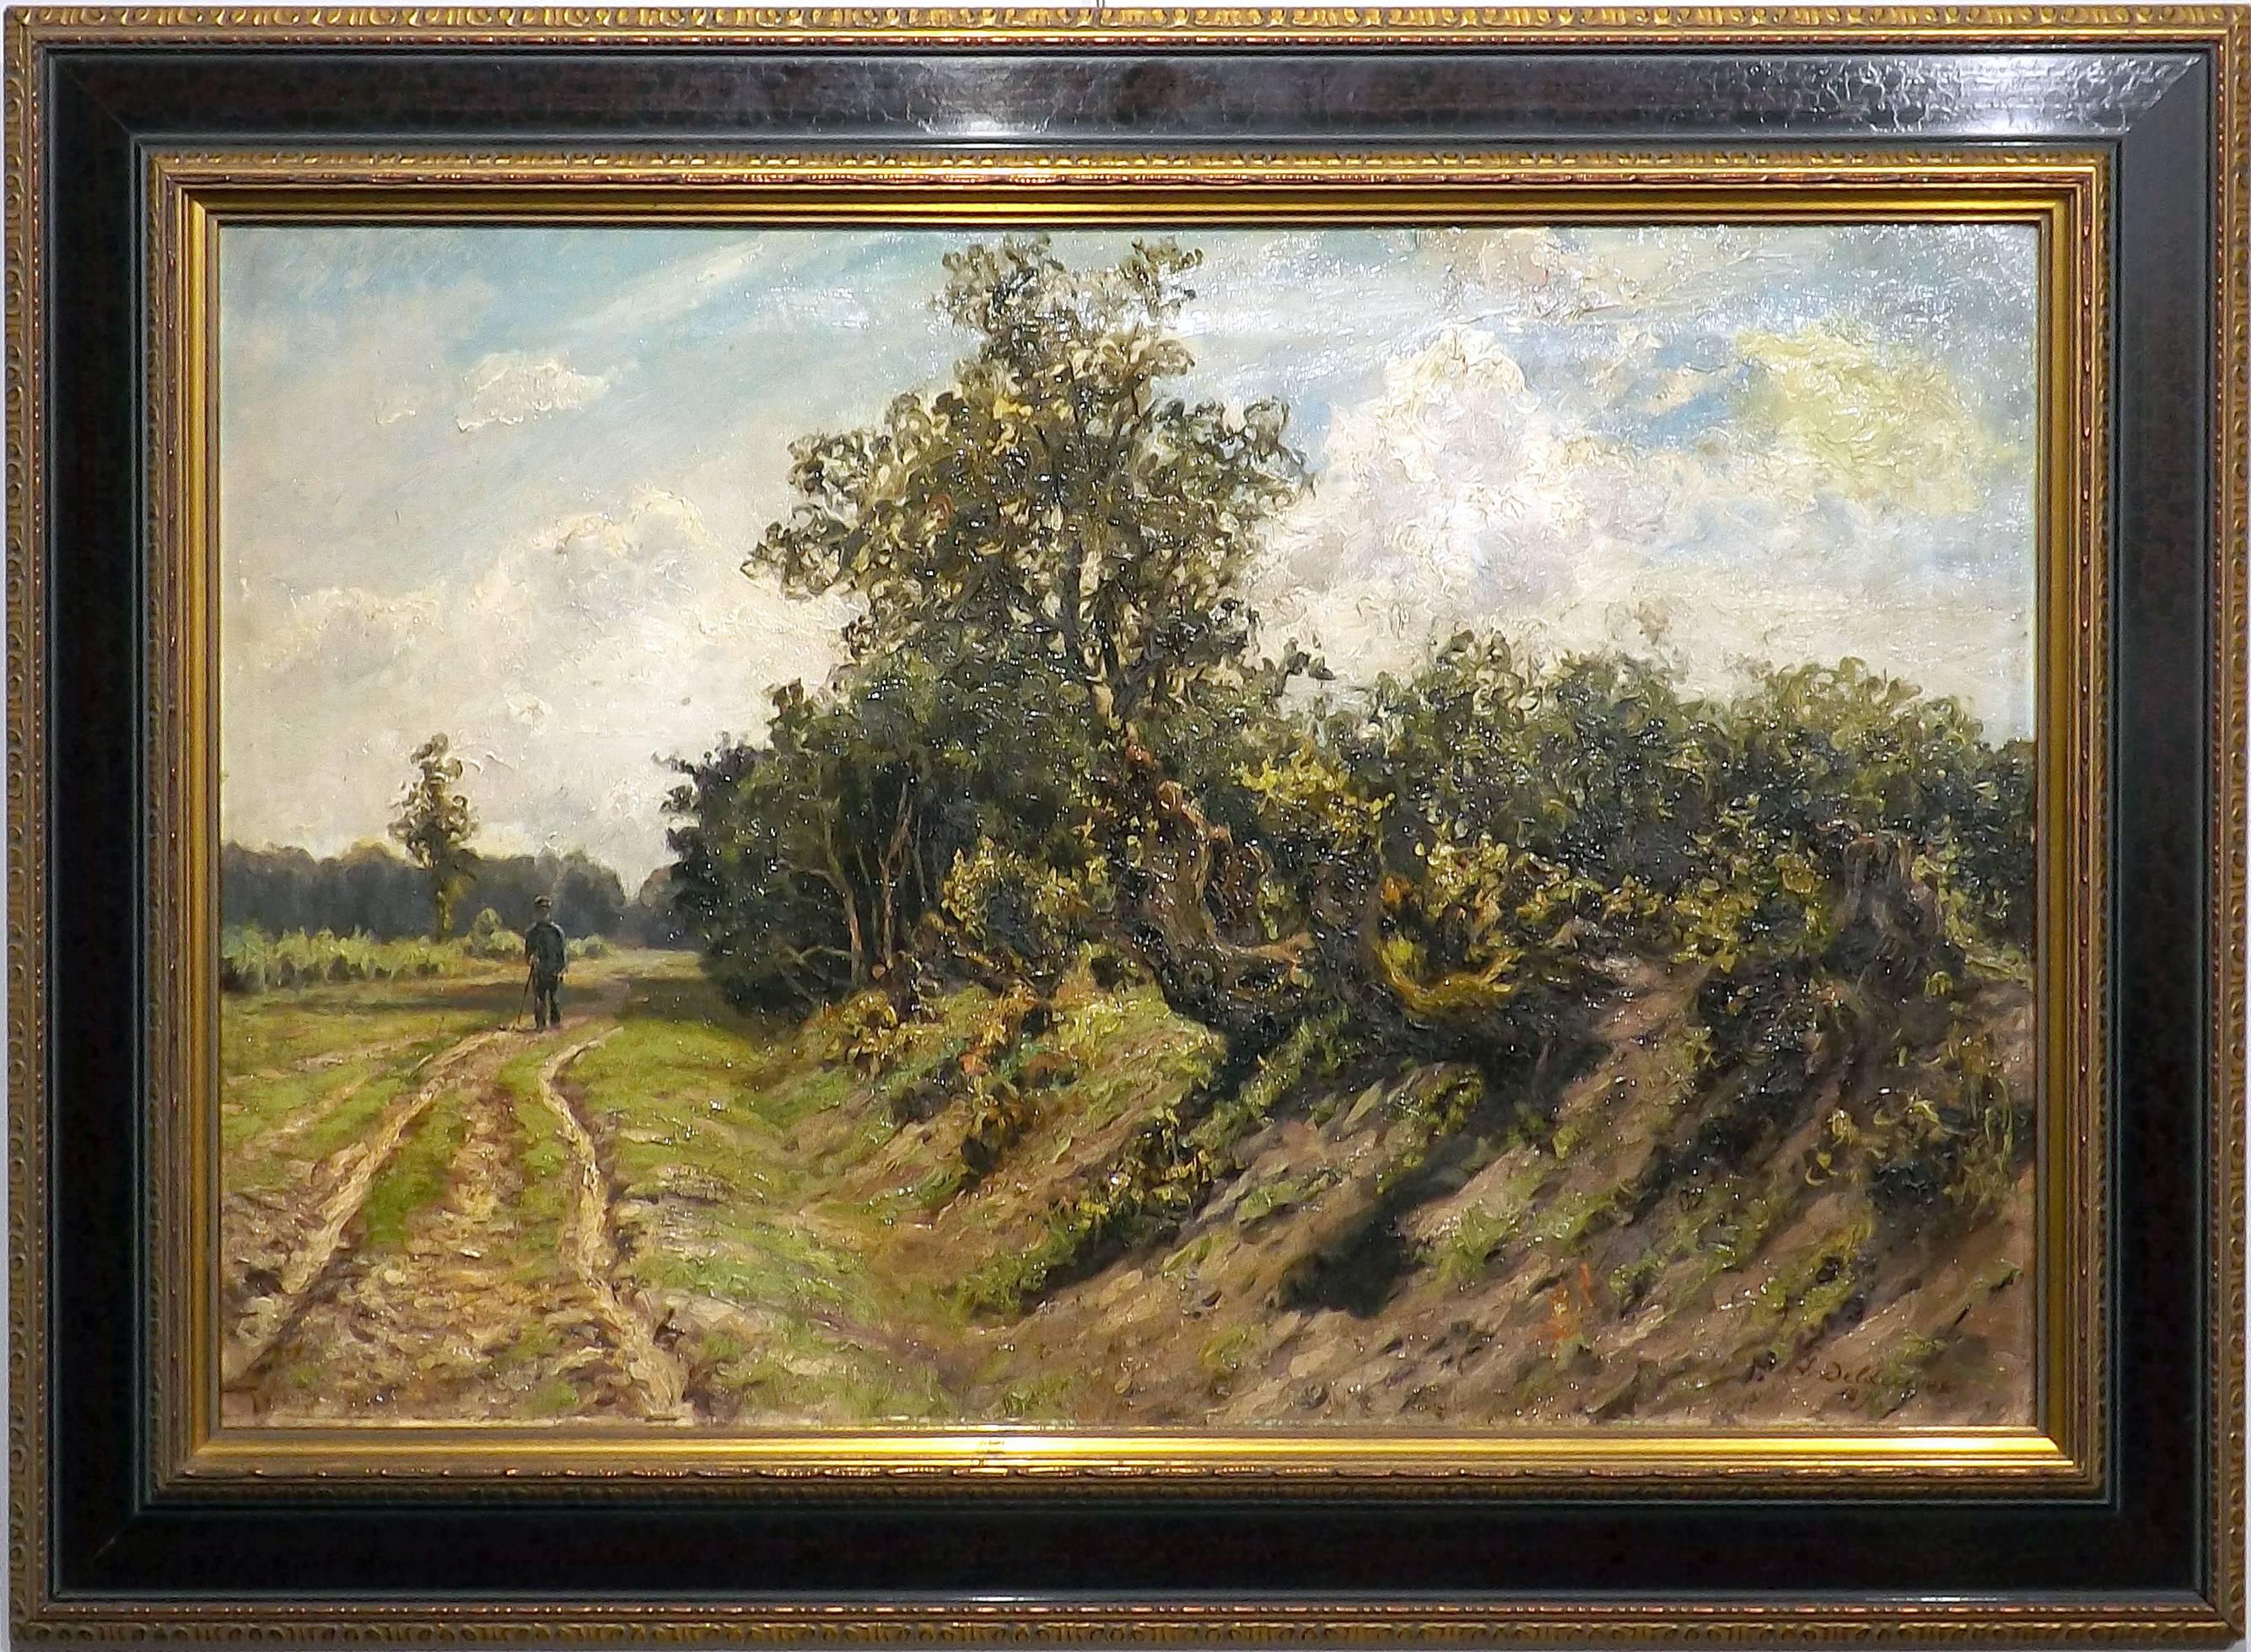 A masterful painting of a lone figure strolling along an old country road painted by Belgian artist Leon Delderenne dated 1896. Beside the road there is an old berm with thick robust bushes and wild stocky trees. The artist's dark green of the